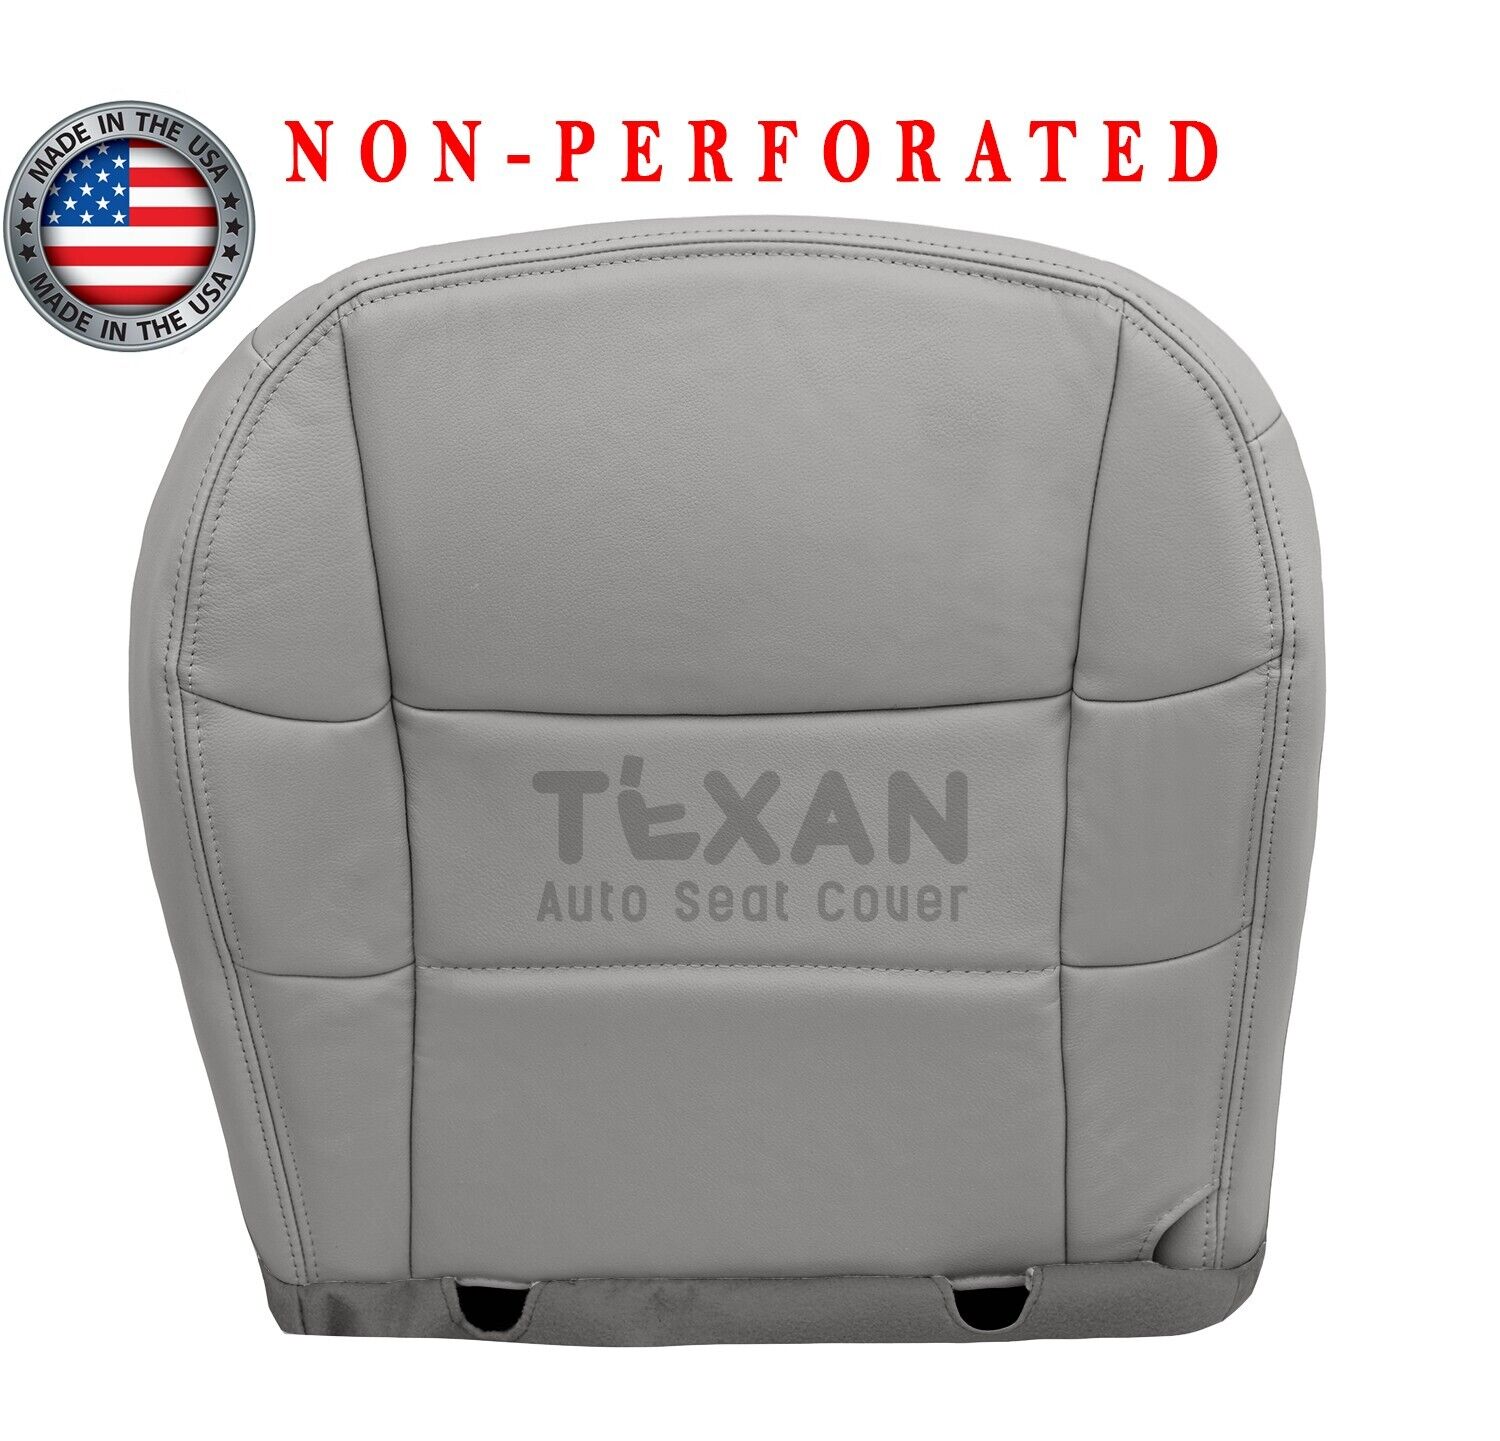 Fits 2000, 2001, 2002 Lincoln Navigator Driver Side Bottom Synthetic Leather Seat Cover Gray